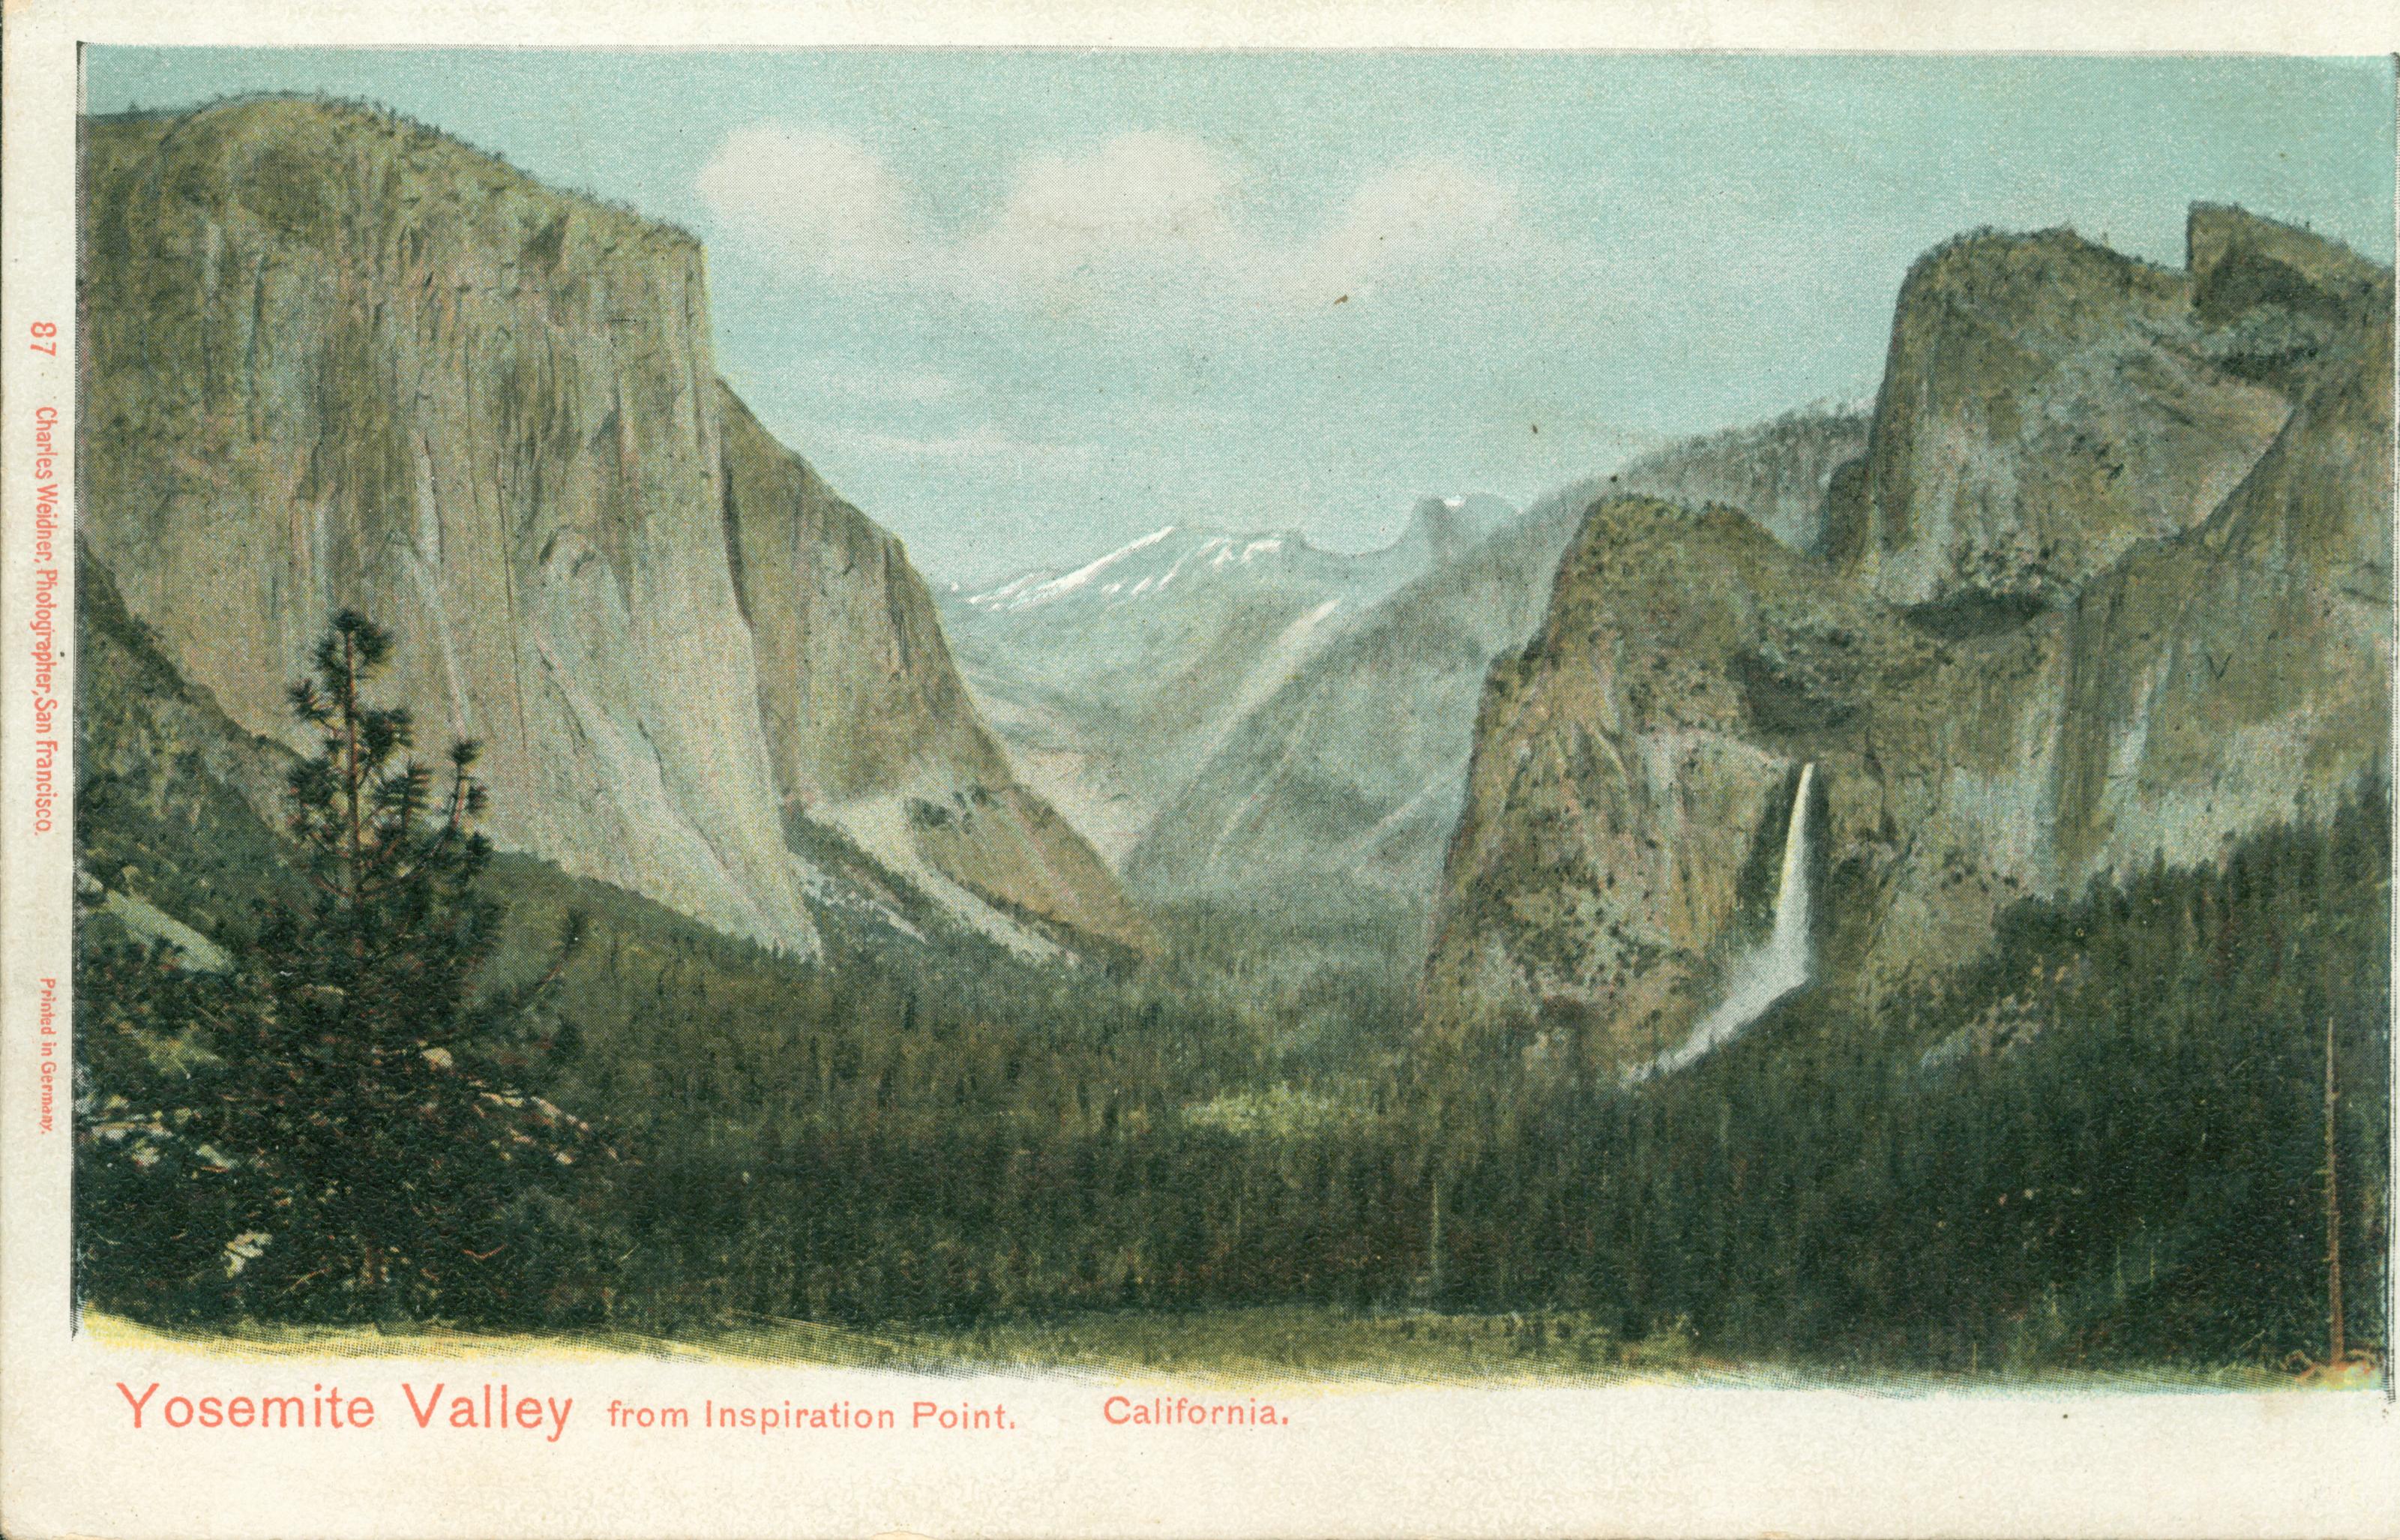 Shows a view of the Yosemite Valley, with a waterfall on the right